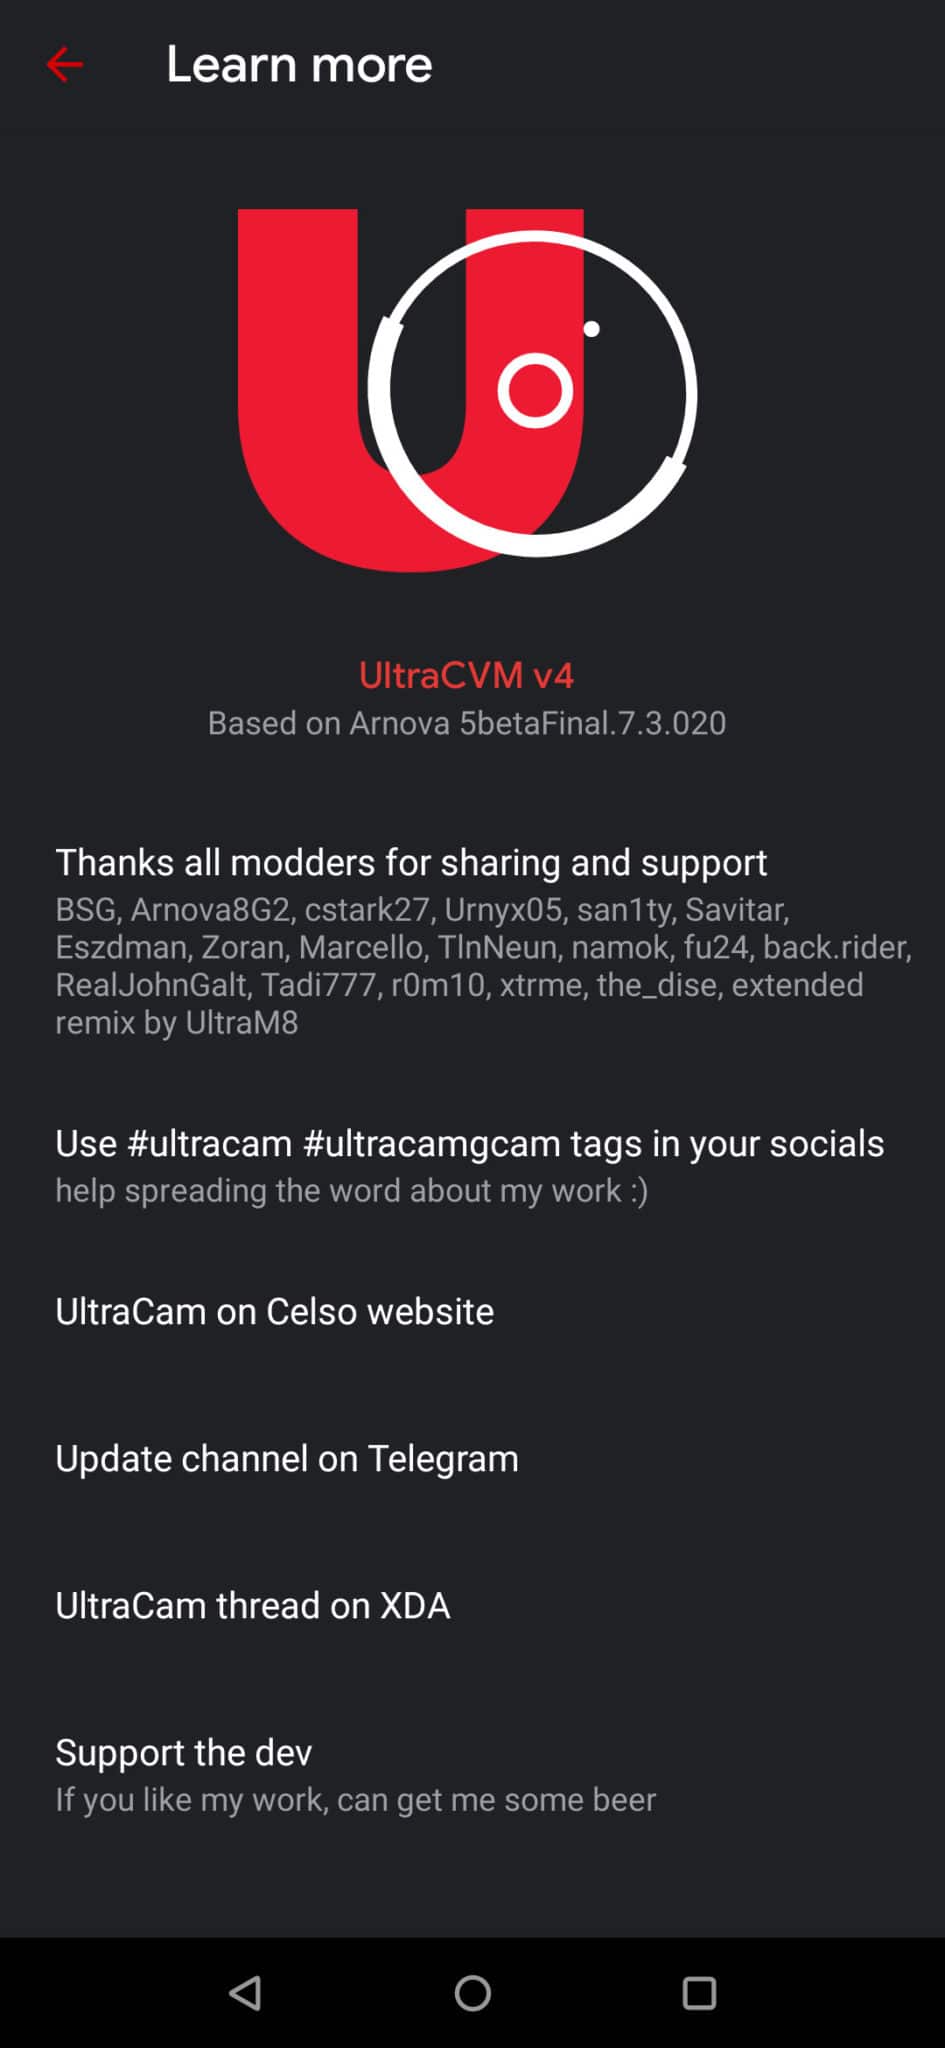 Download Google Camera Ultra CVM MOD APK 4.0 for all Android devices